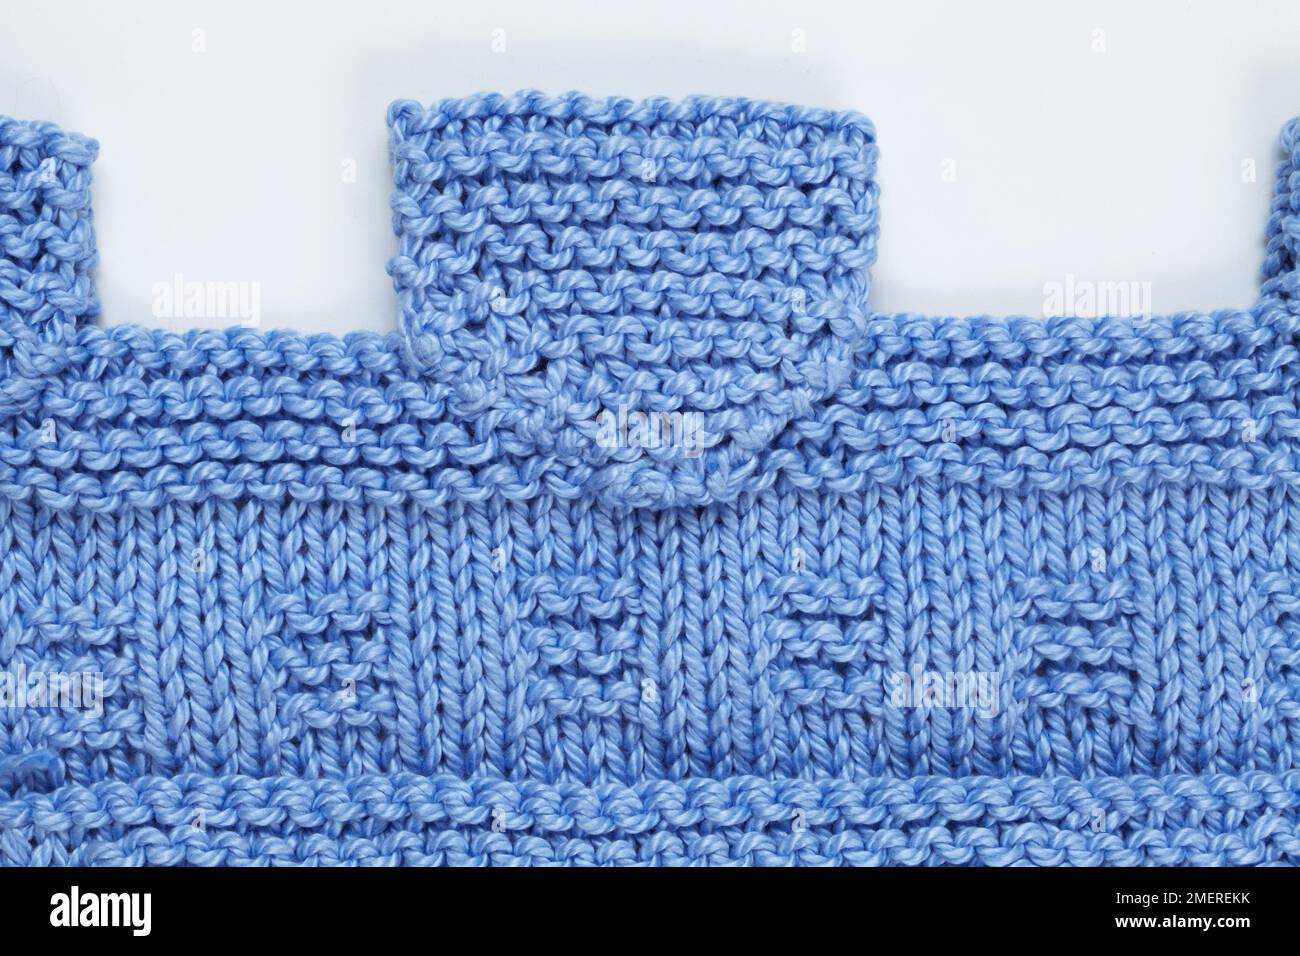 Top of blue knitted toy organiser Stock Photo